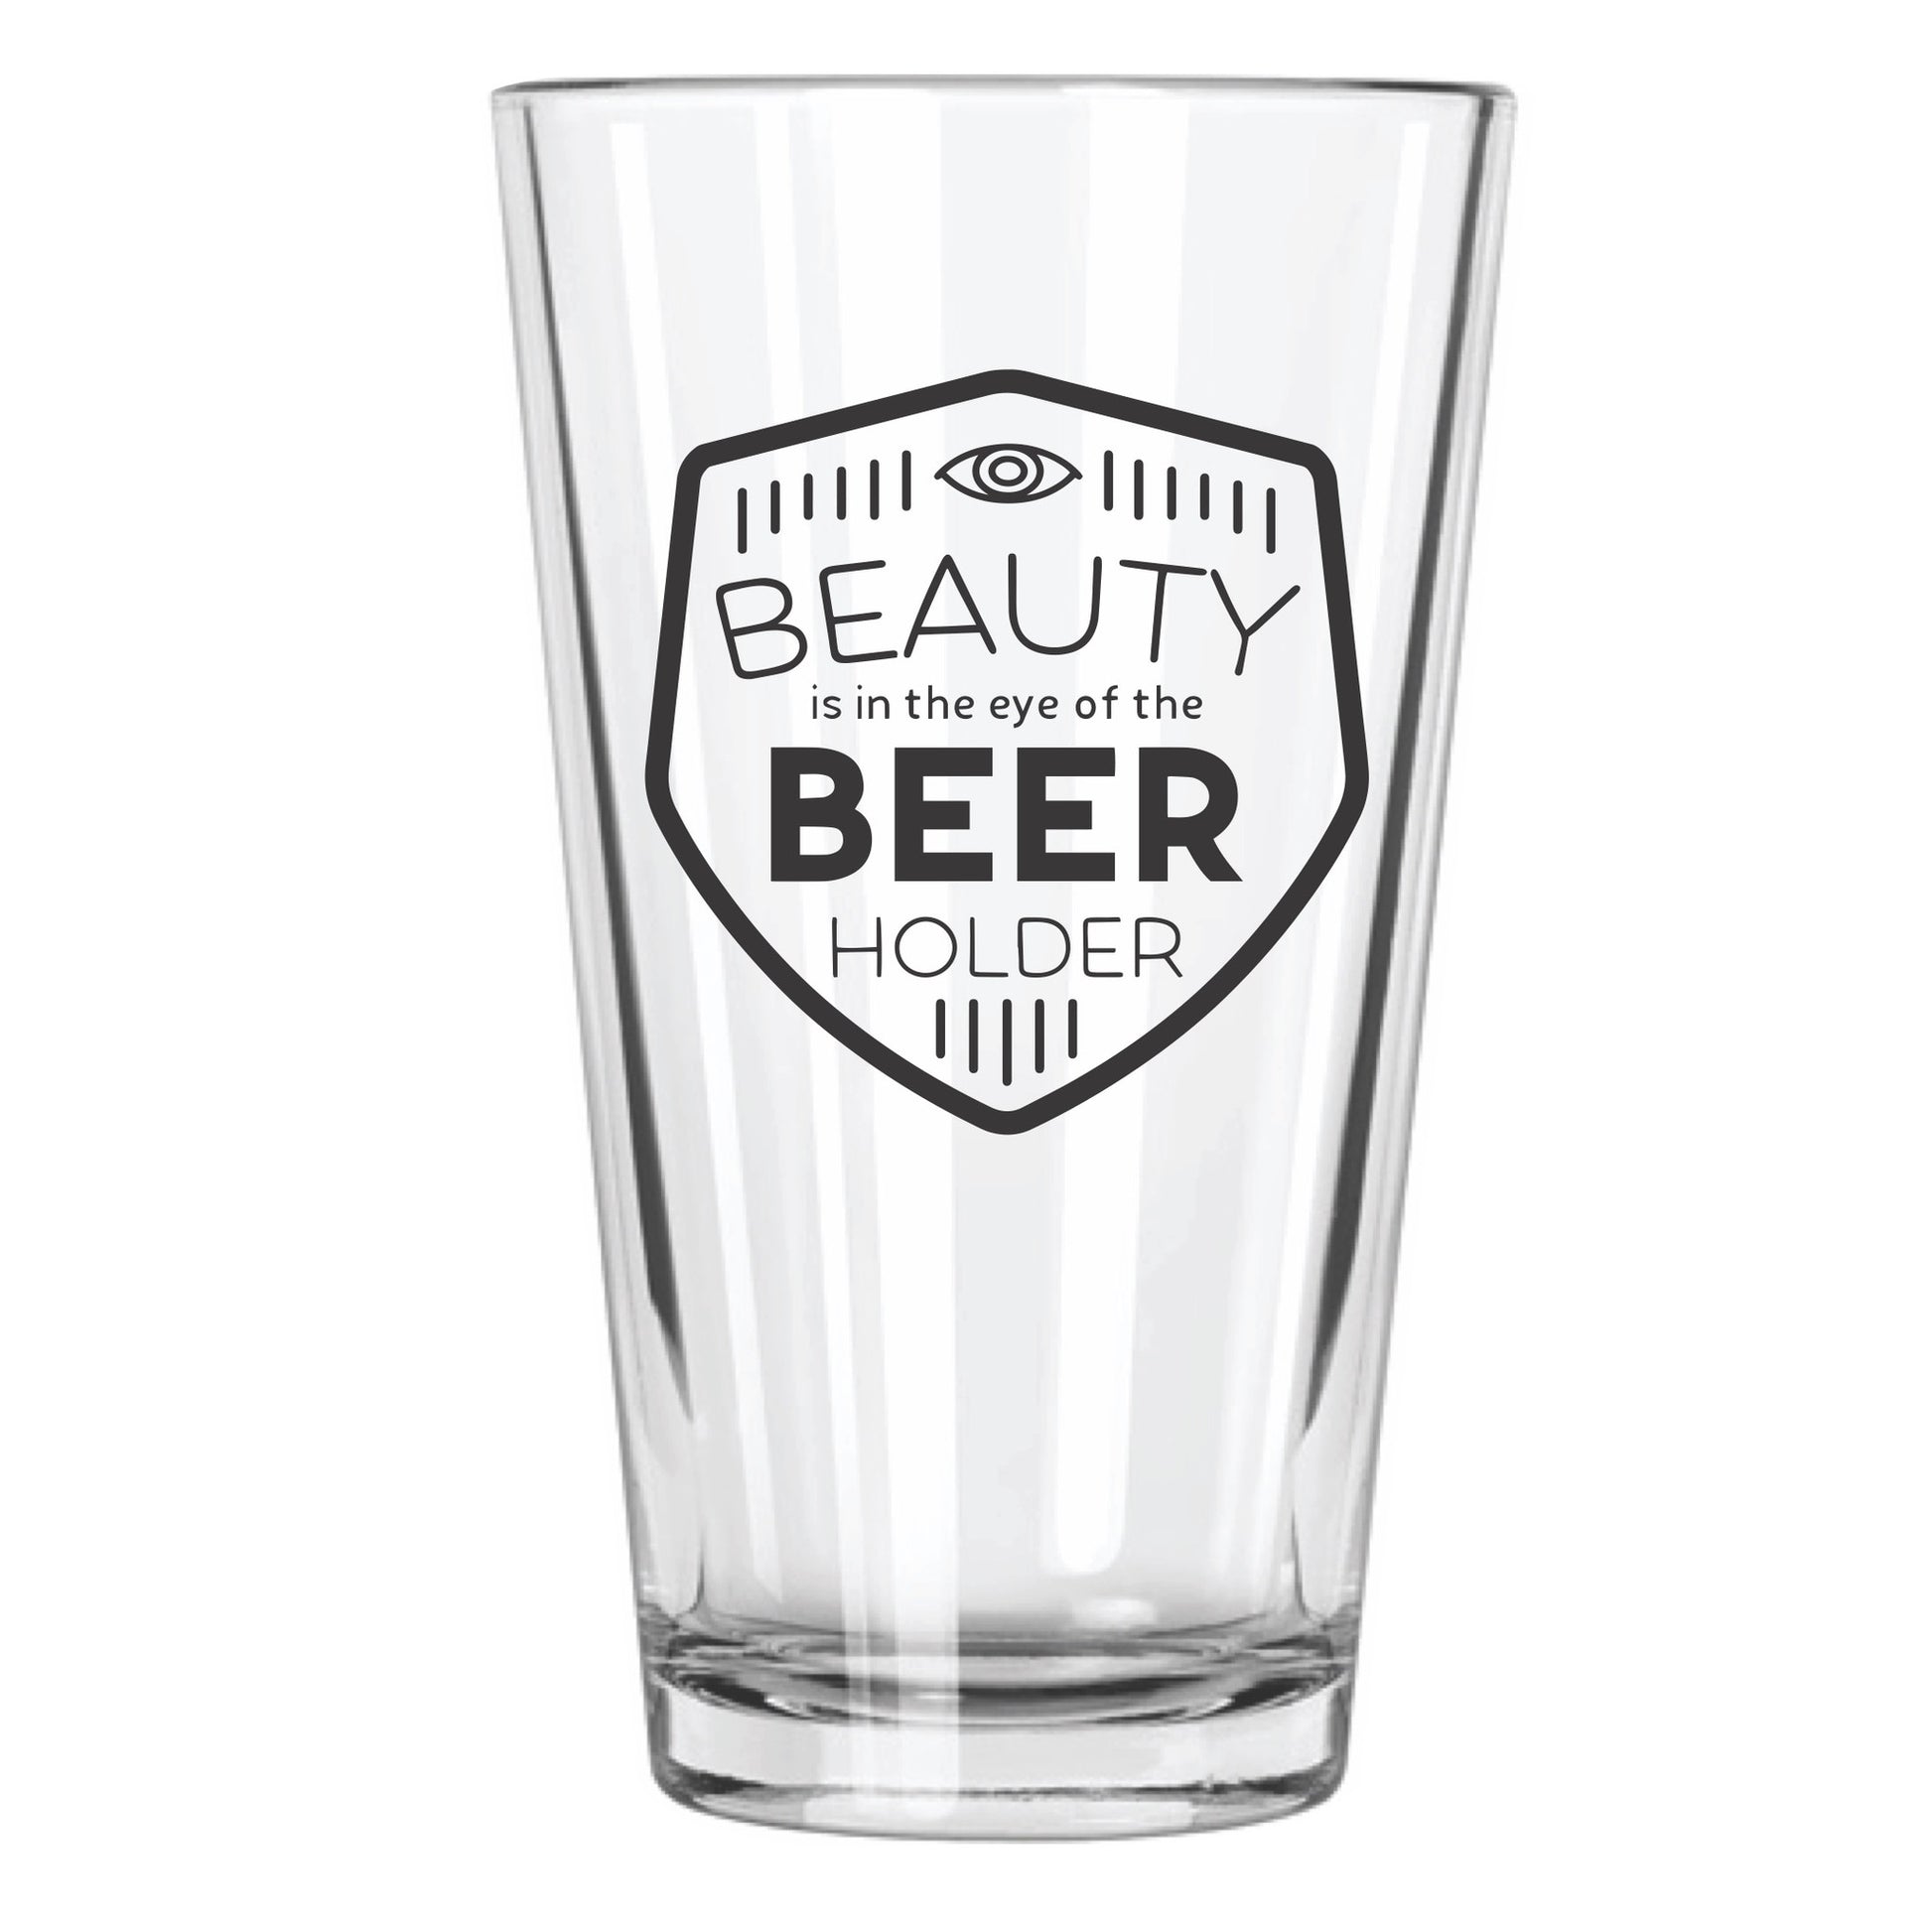 Beauty is in the Eye of the Beer Holder Beer Glass - Northern Glasses Pint Glass